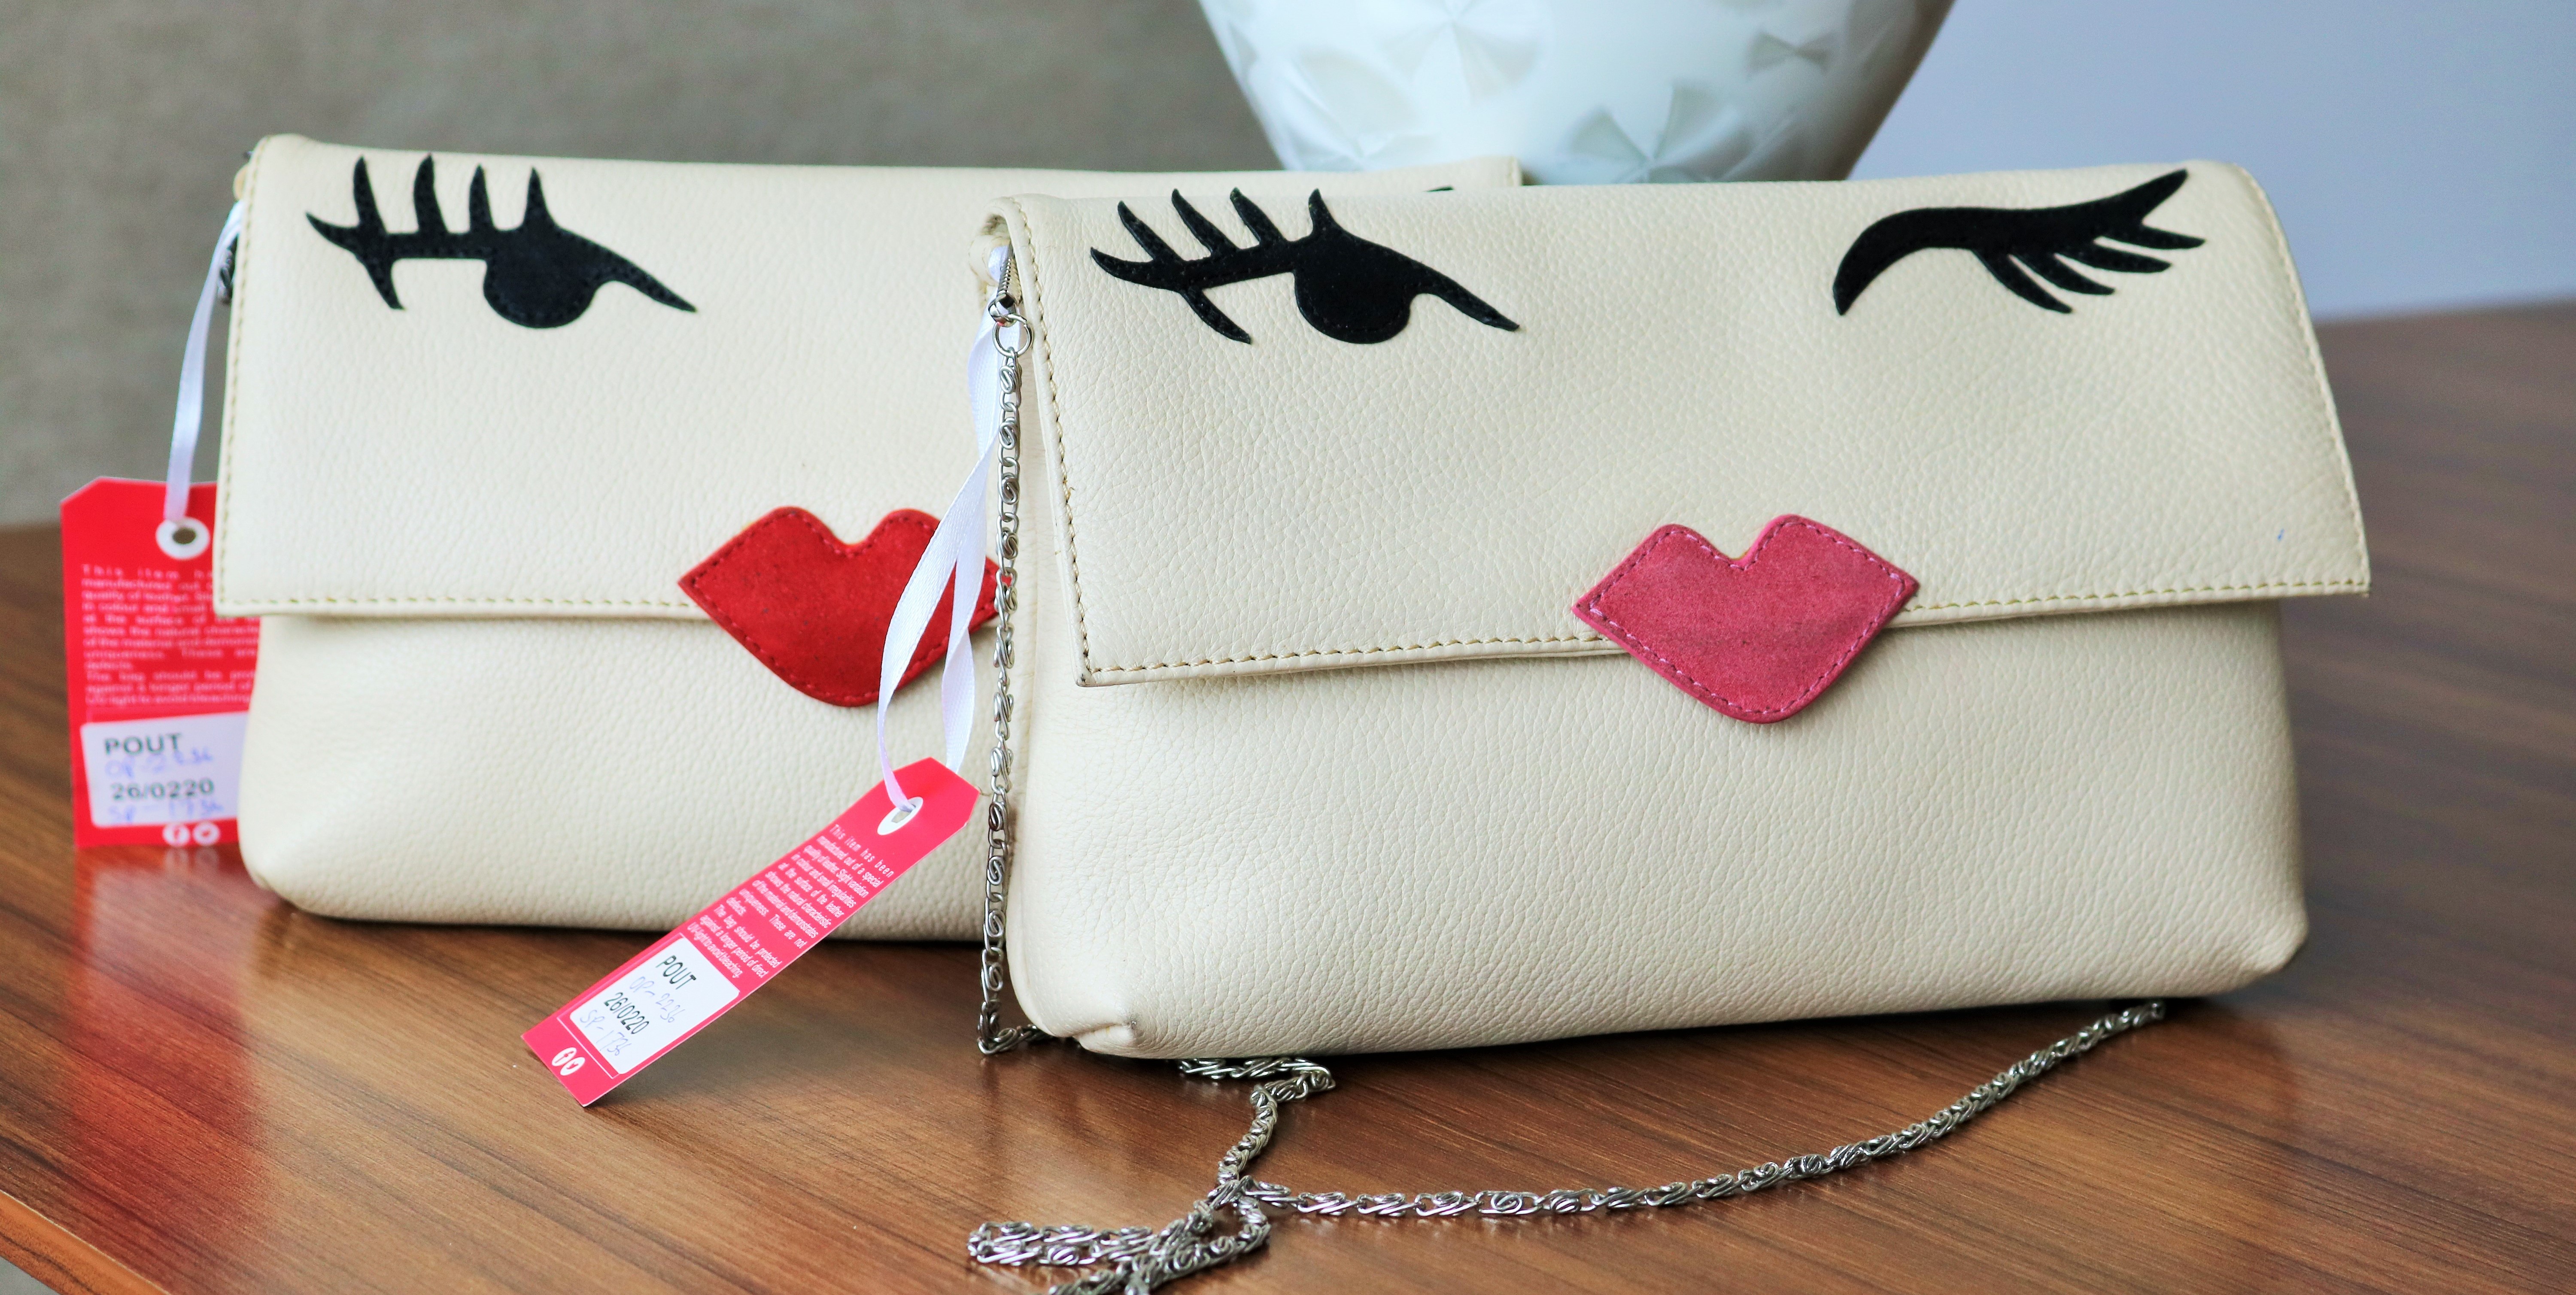 I love these Pout bags..obviously!